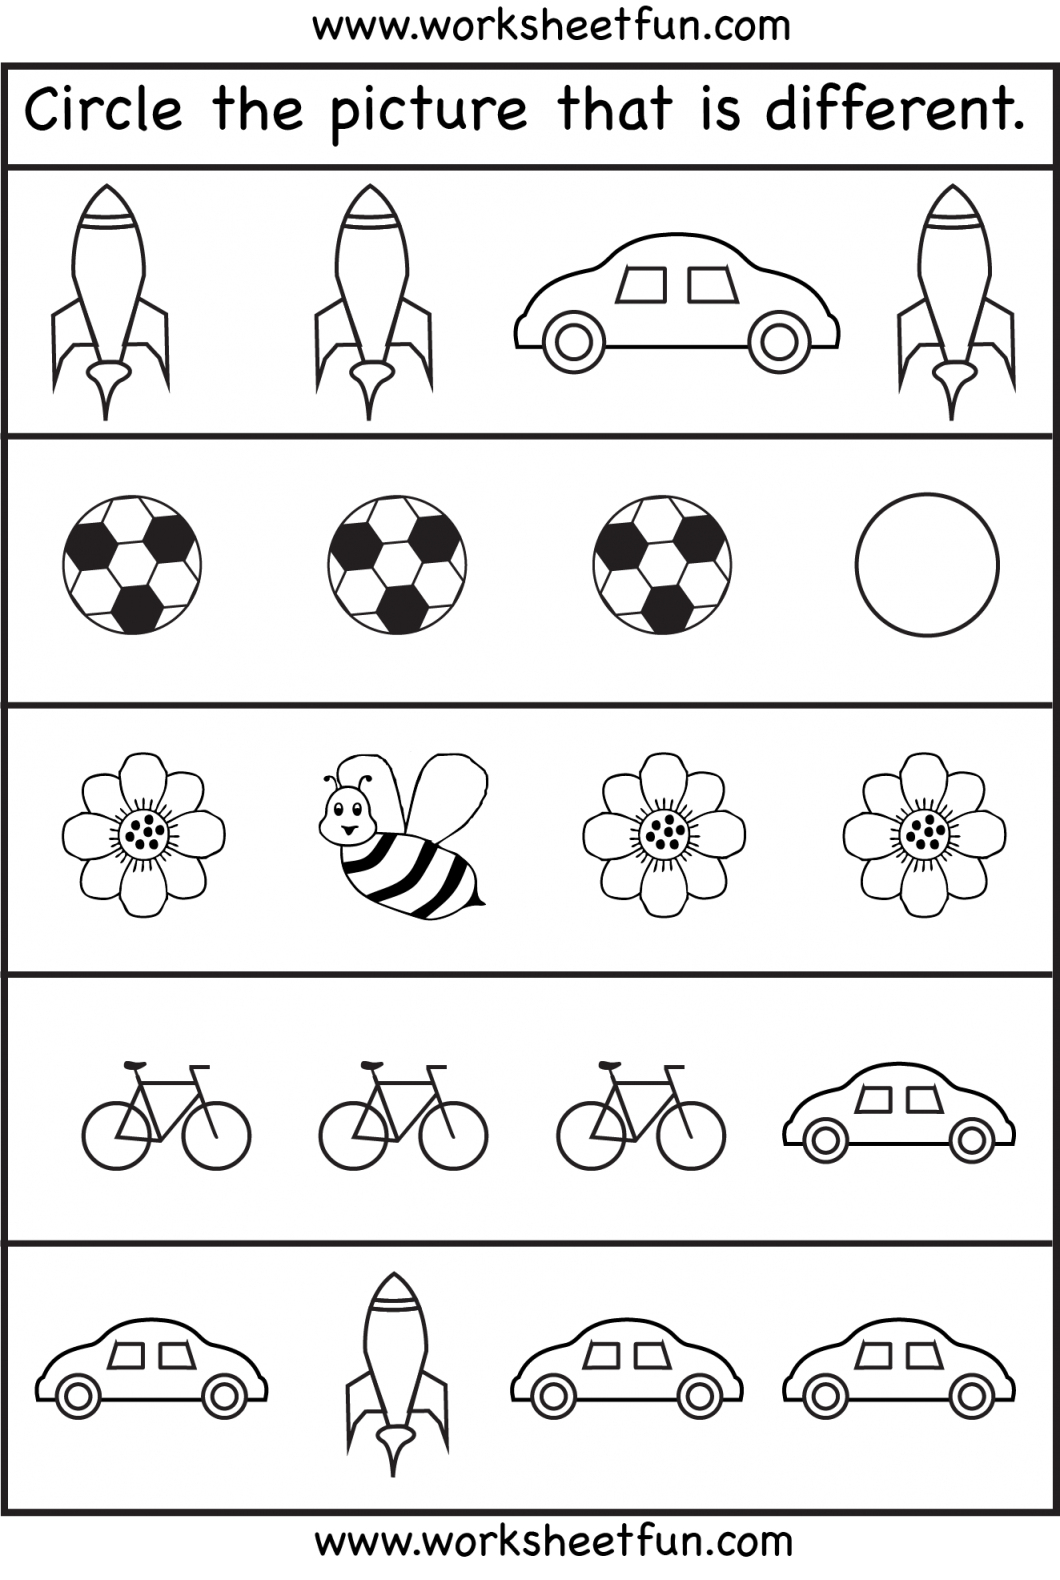 Free Preschool Worksheets Age 3 – With Printable Learning Activities | Free Printable Preschool Worksheets Age 3